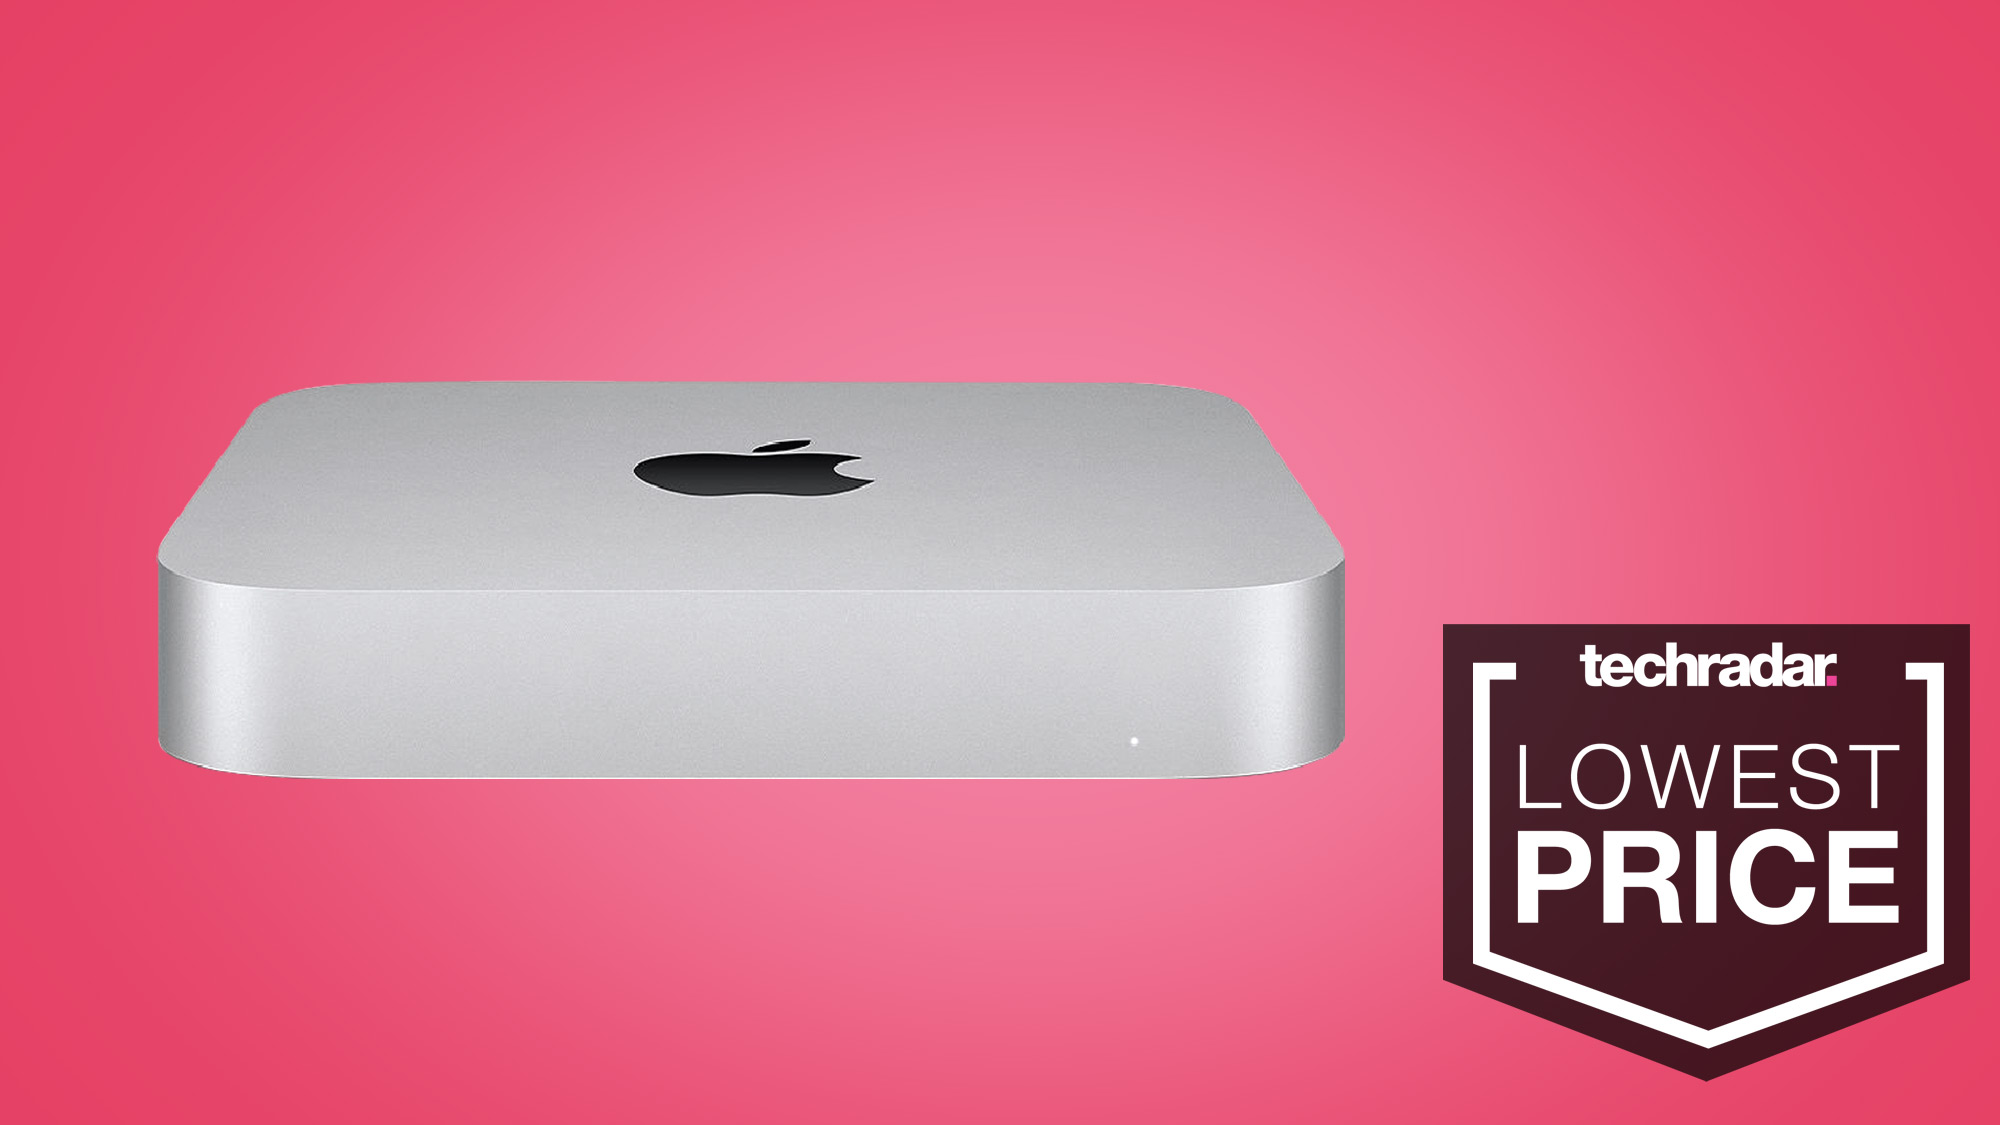 M1 Mac Mini deals are back down to a record low $599 price right now ...